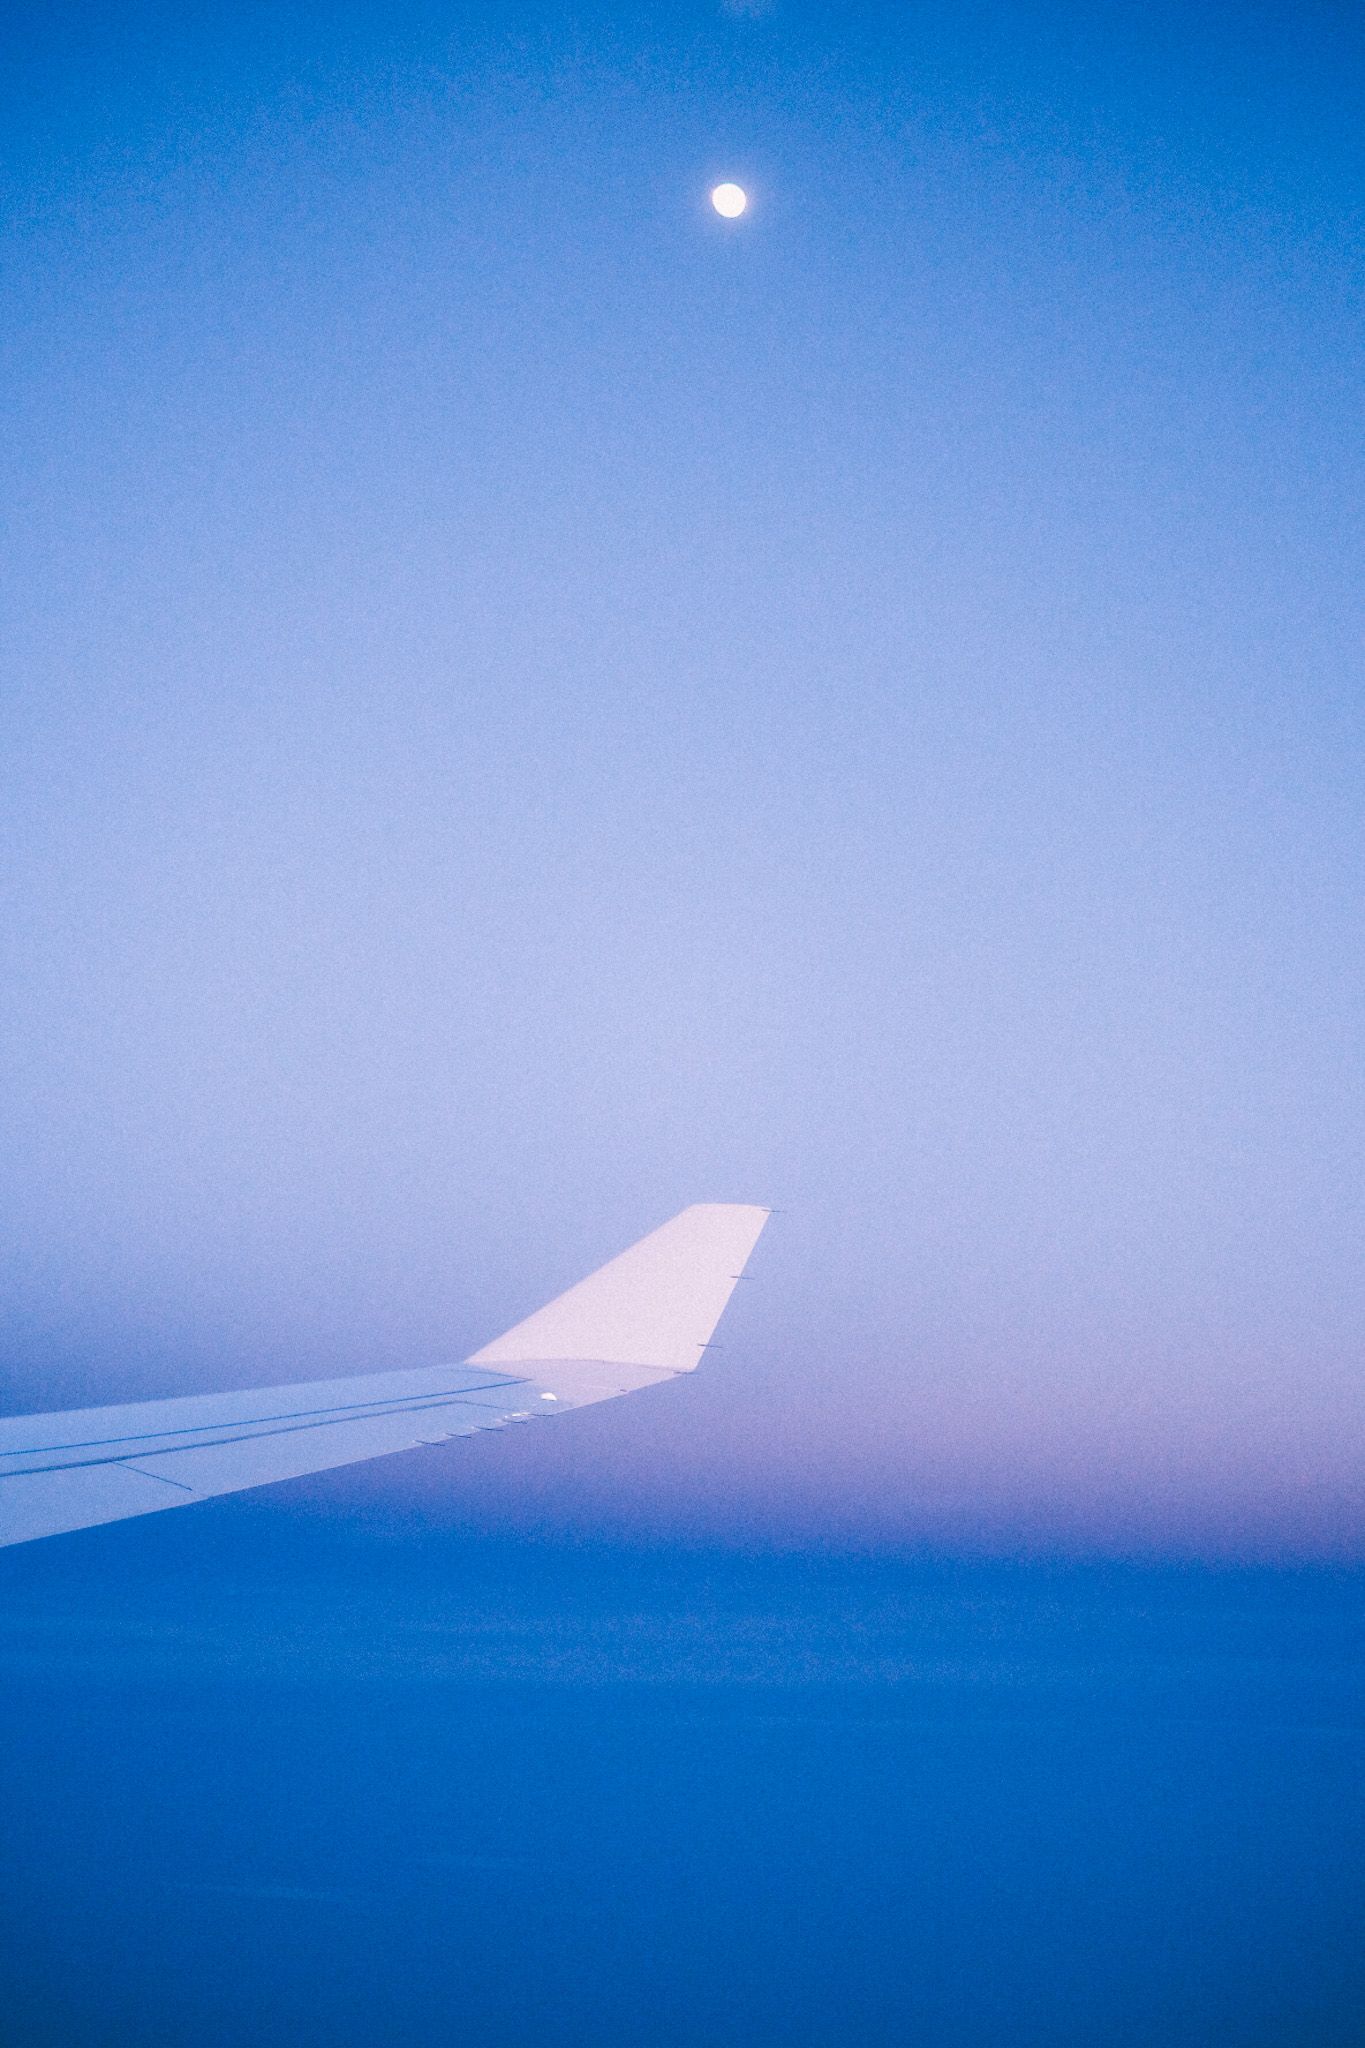 The view from the window of a plane at twilight, a purple-blue sky with a moon placed over the wing.